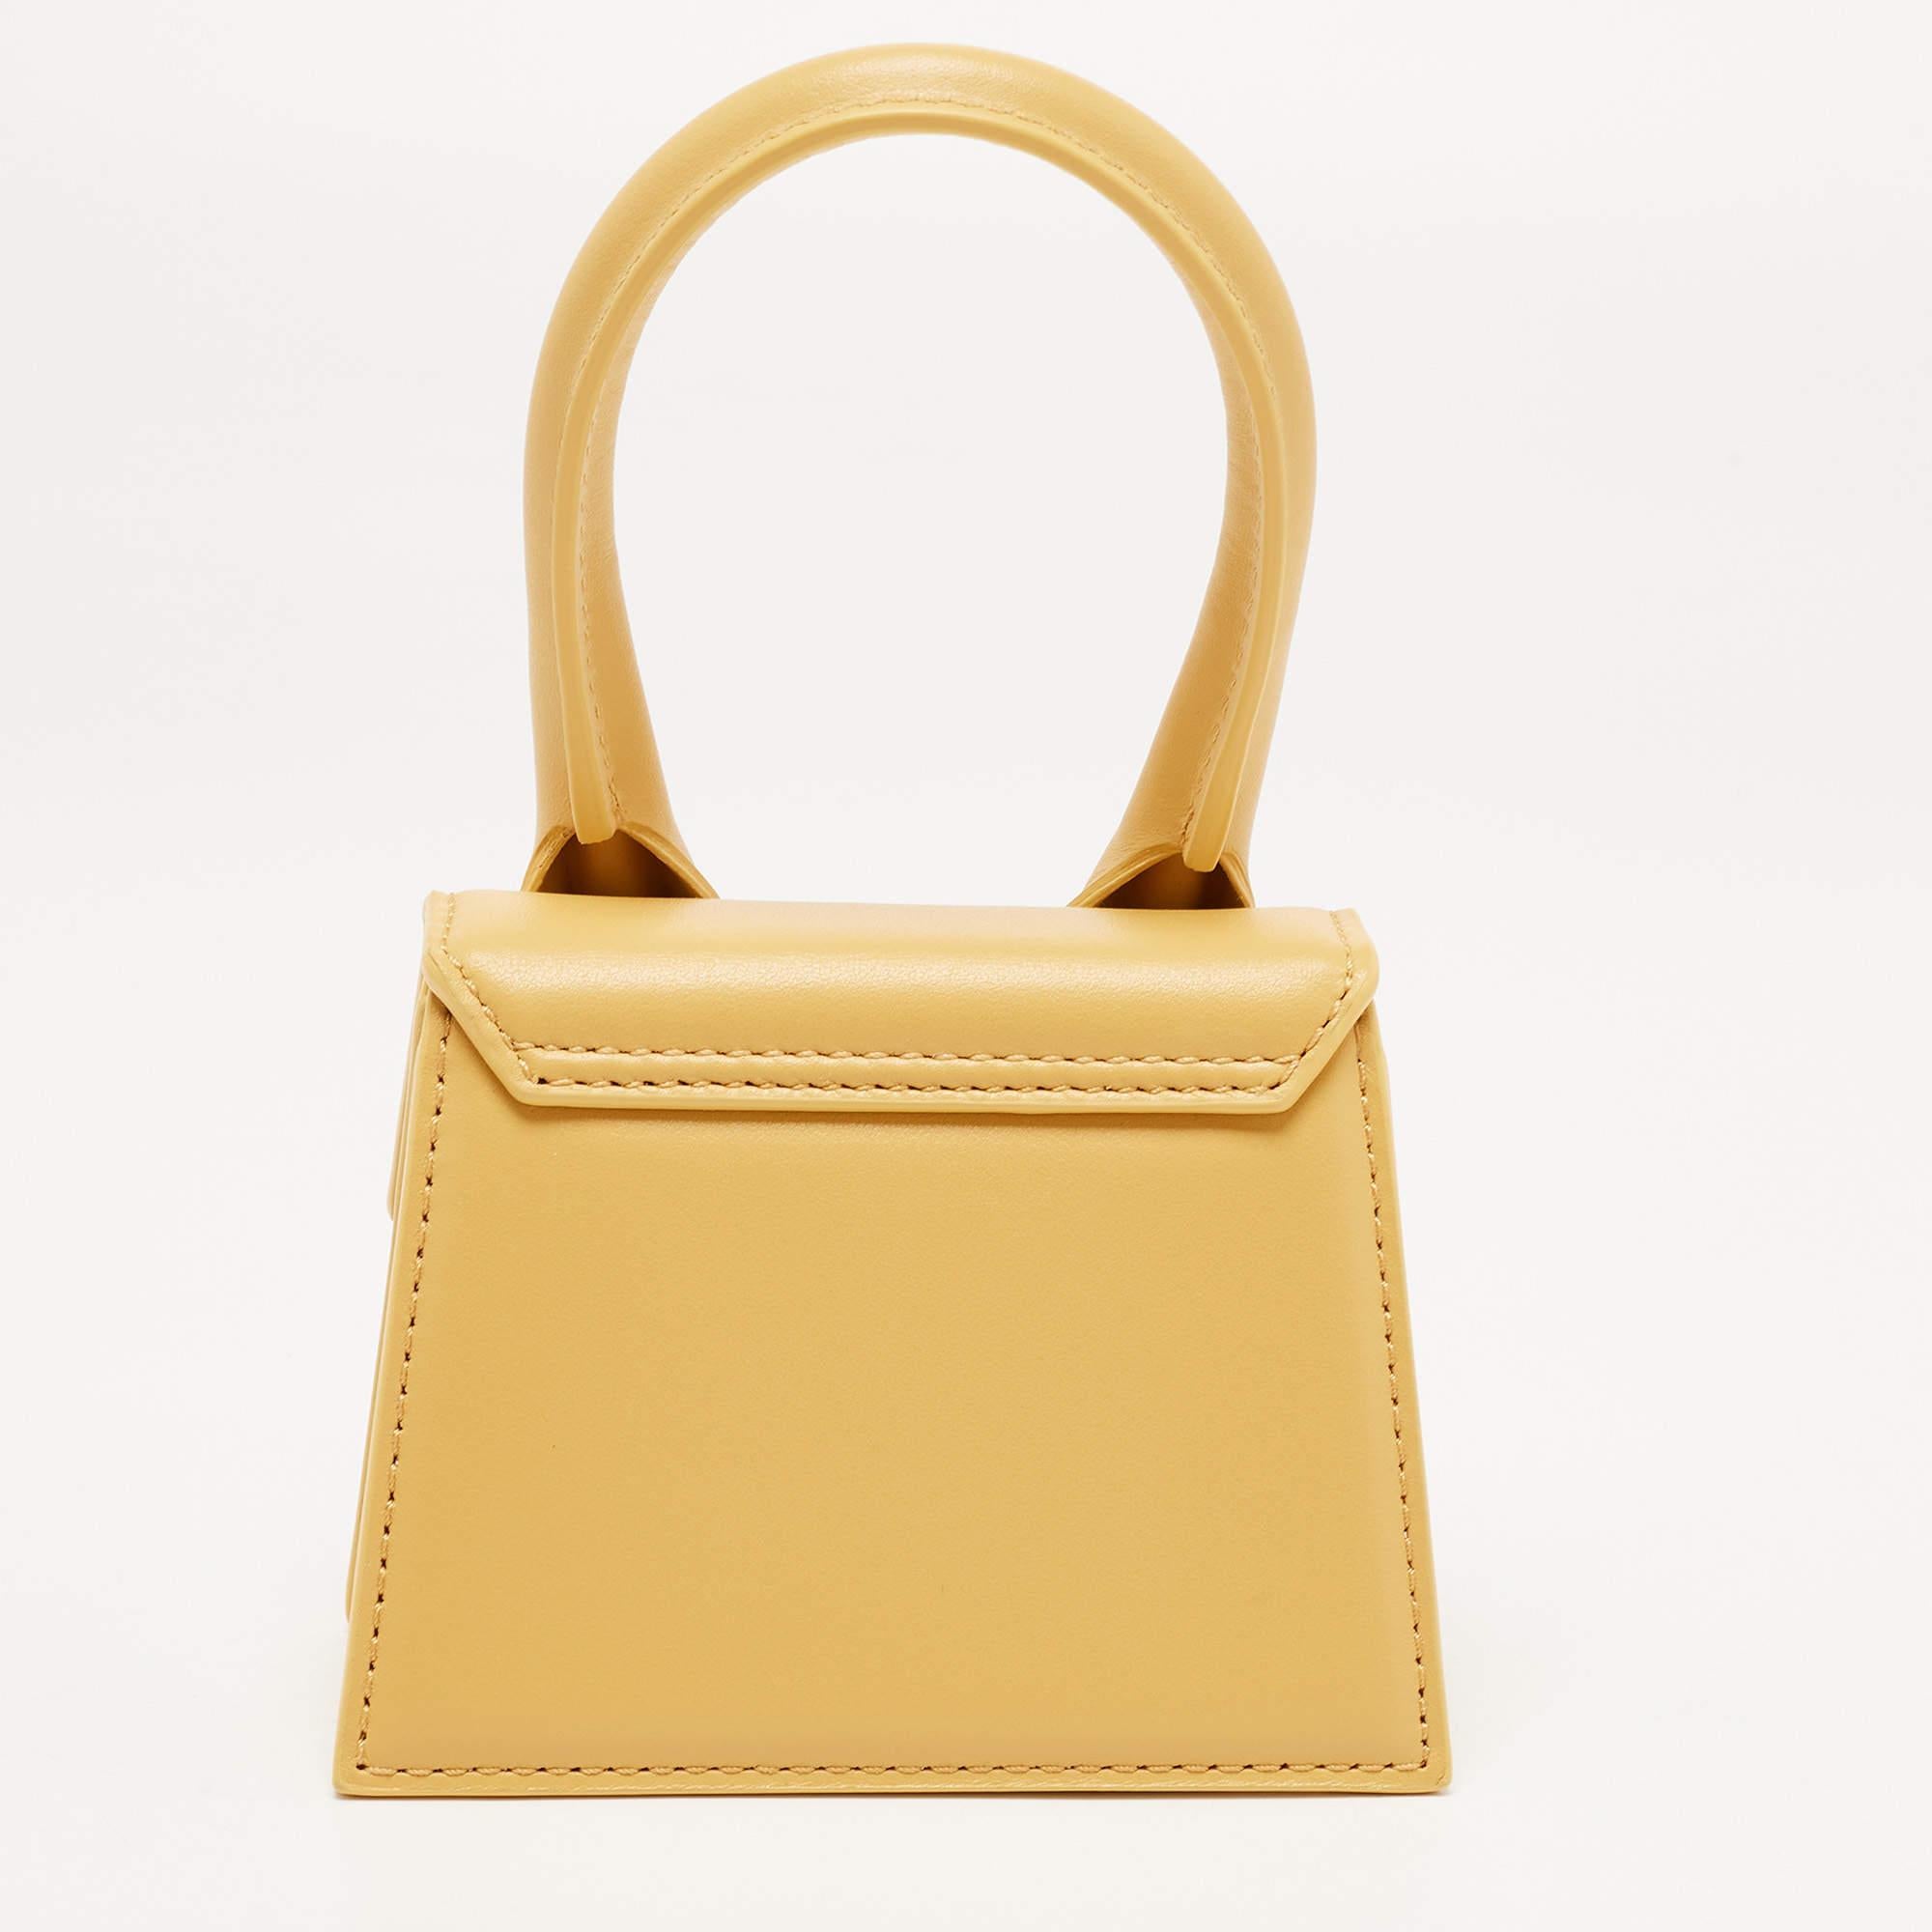 Chances are that you have already noticed this bag on your social media feeds carried by influencers and celebrities. A cult-favorite piece, this Jacquemus Le Chiquito bag comes in a structured silhouette and has a rolled handle. The creation comes